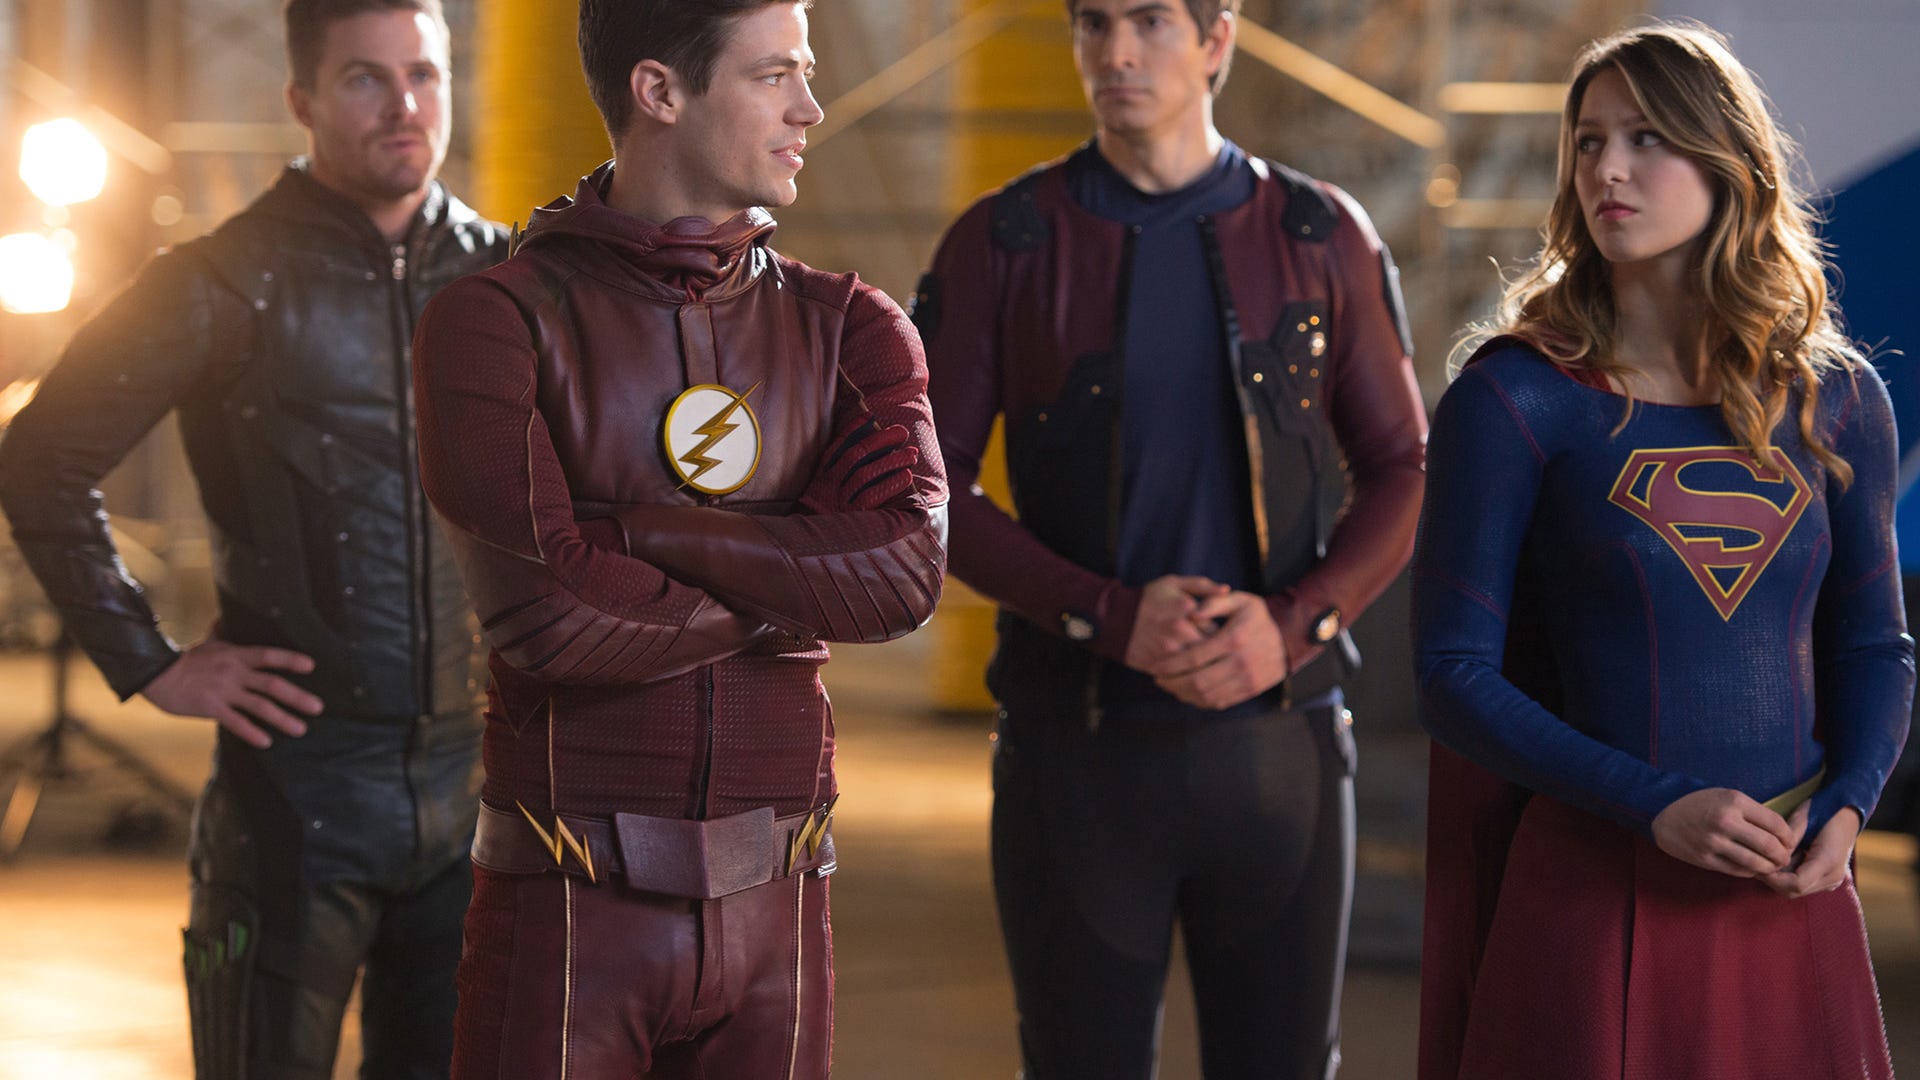 Grant Gustin, Melissa Benoist, Brandon Routh and Stephen Amell, Legends of Tomorrow